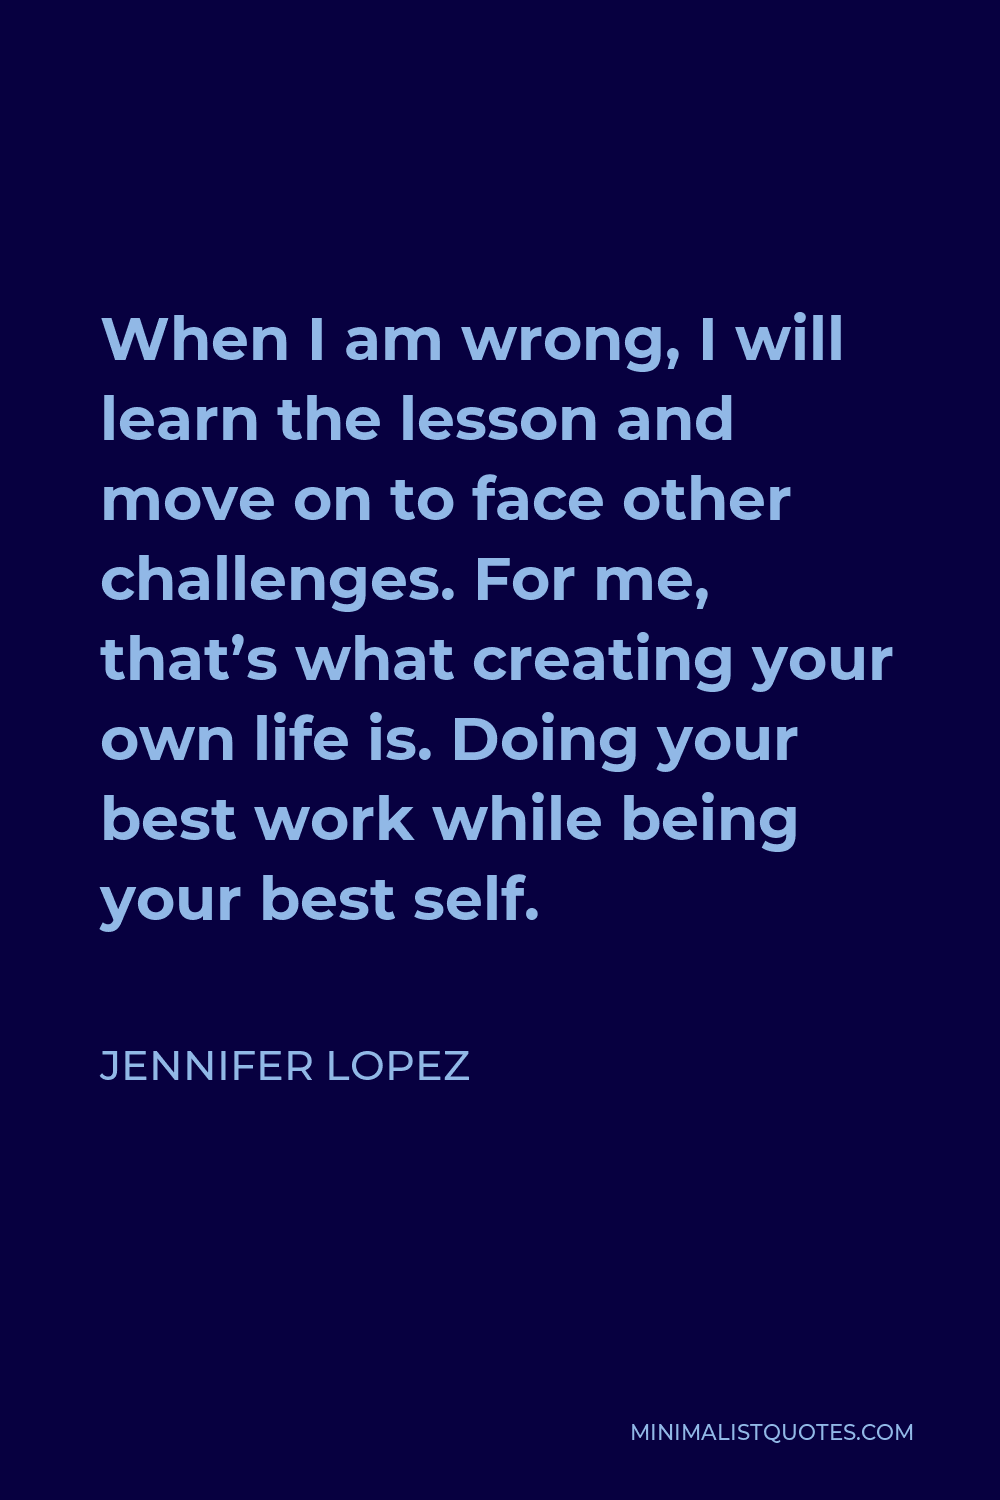 Jennifer Lopez Quote - When I am wrong, I will learn the lesson and move on to face other challenges. For me, that’s what creating your own life is. Doing your best work while being your best self.